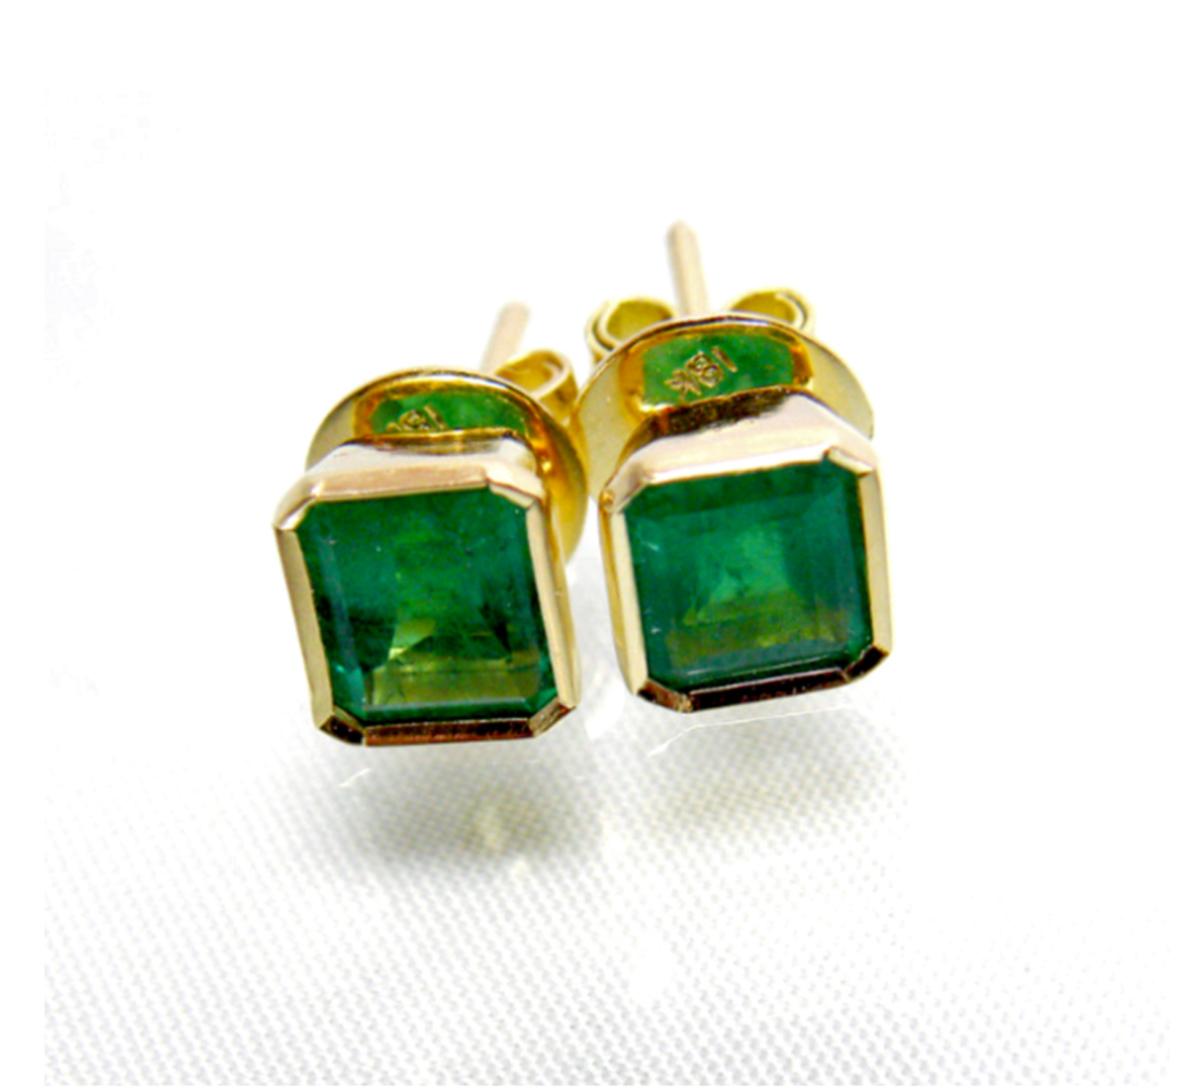 2.20 Carat Natural Emerald Stud Earrings 18k Yellow Gold
Primary Stones: 100% Natural Colombian Emerald 
Average Color/Clarity : Extraordinary Color AAA+ Medium Green/ Clarity, VS 
Total Weight Emeralds: Approx. 2.20 Carats 
Shape or Cut: Emerald